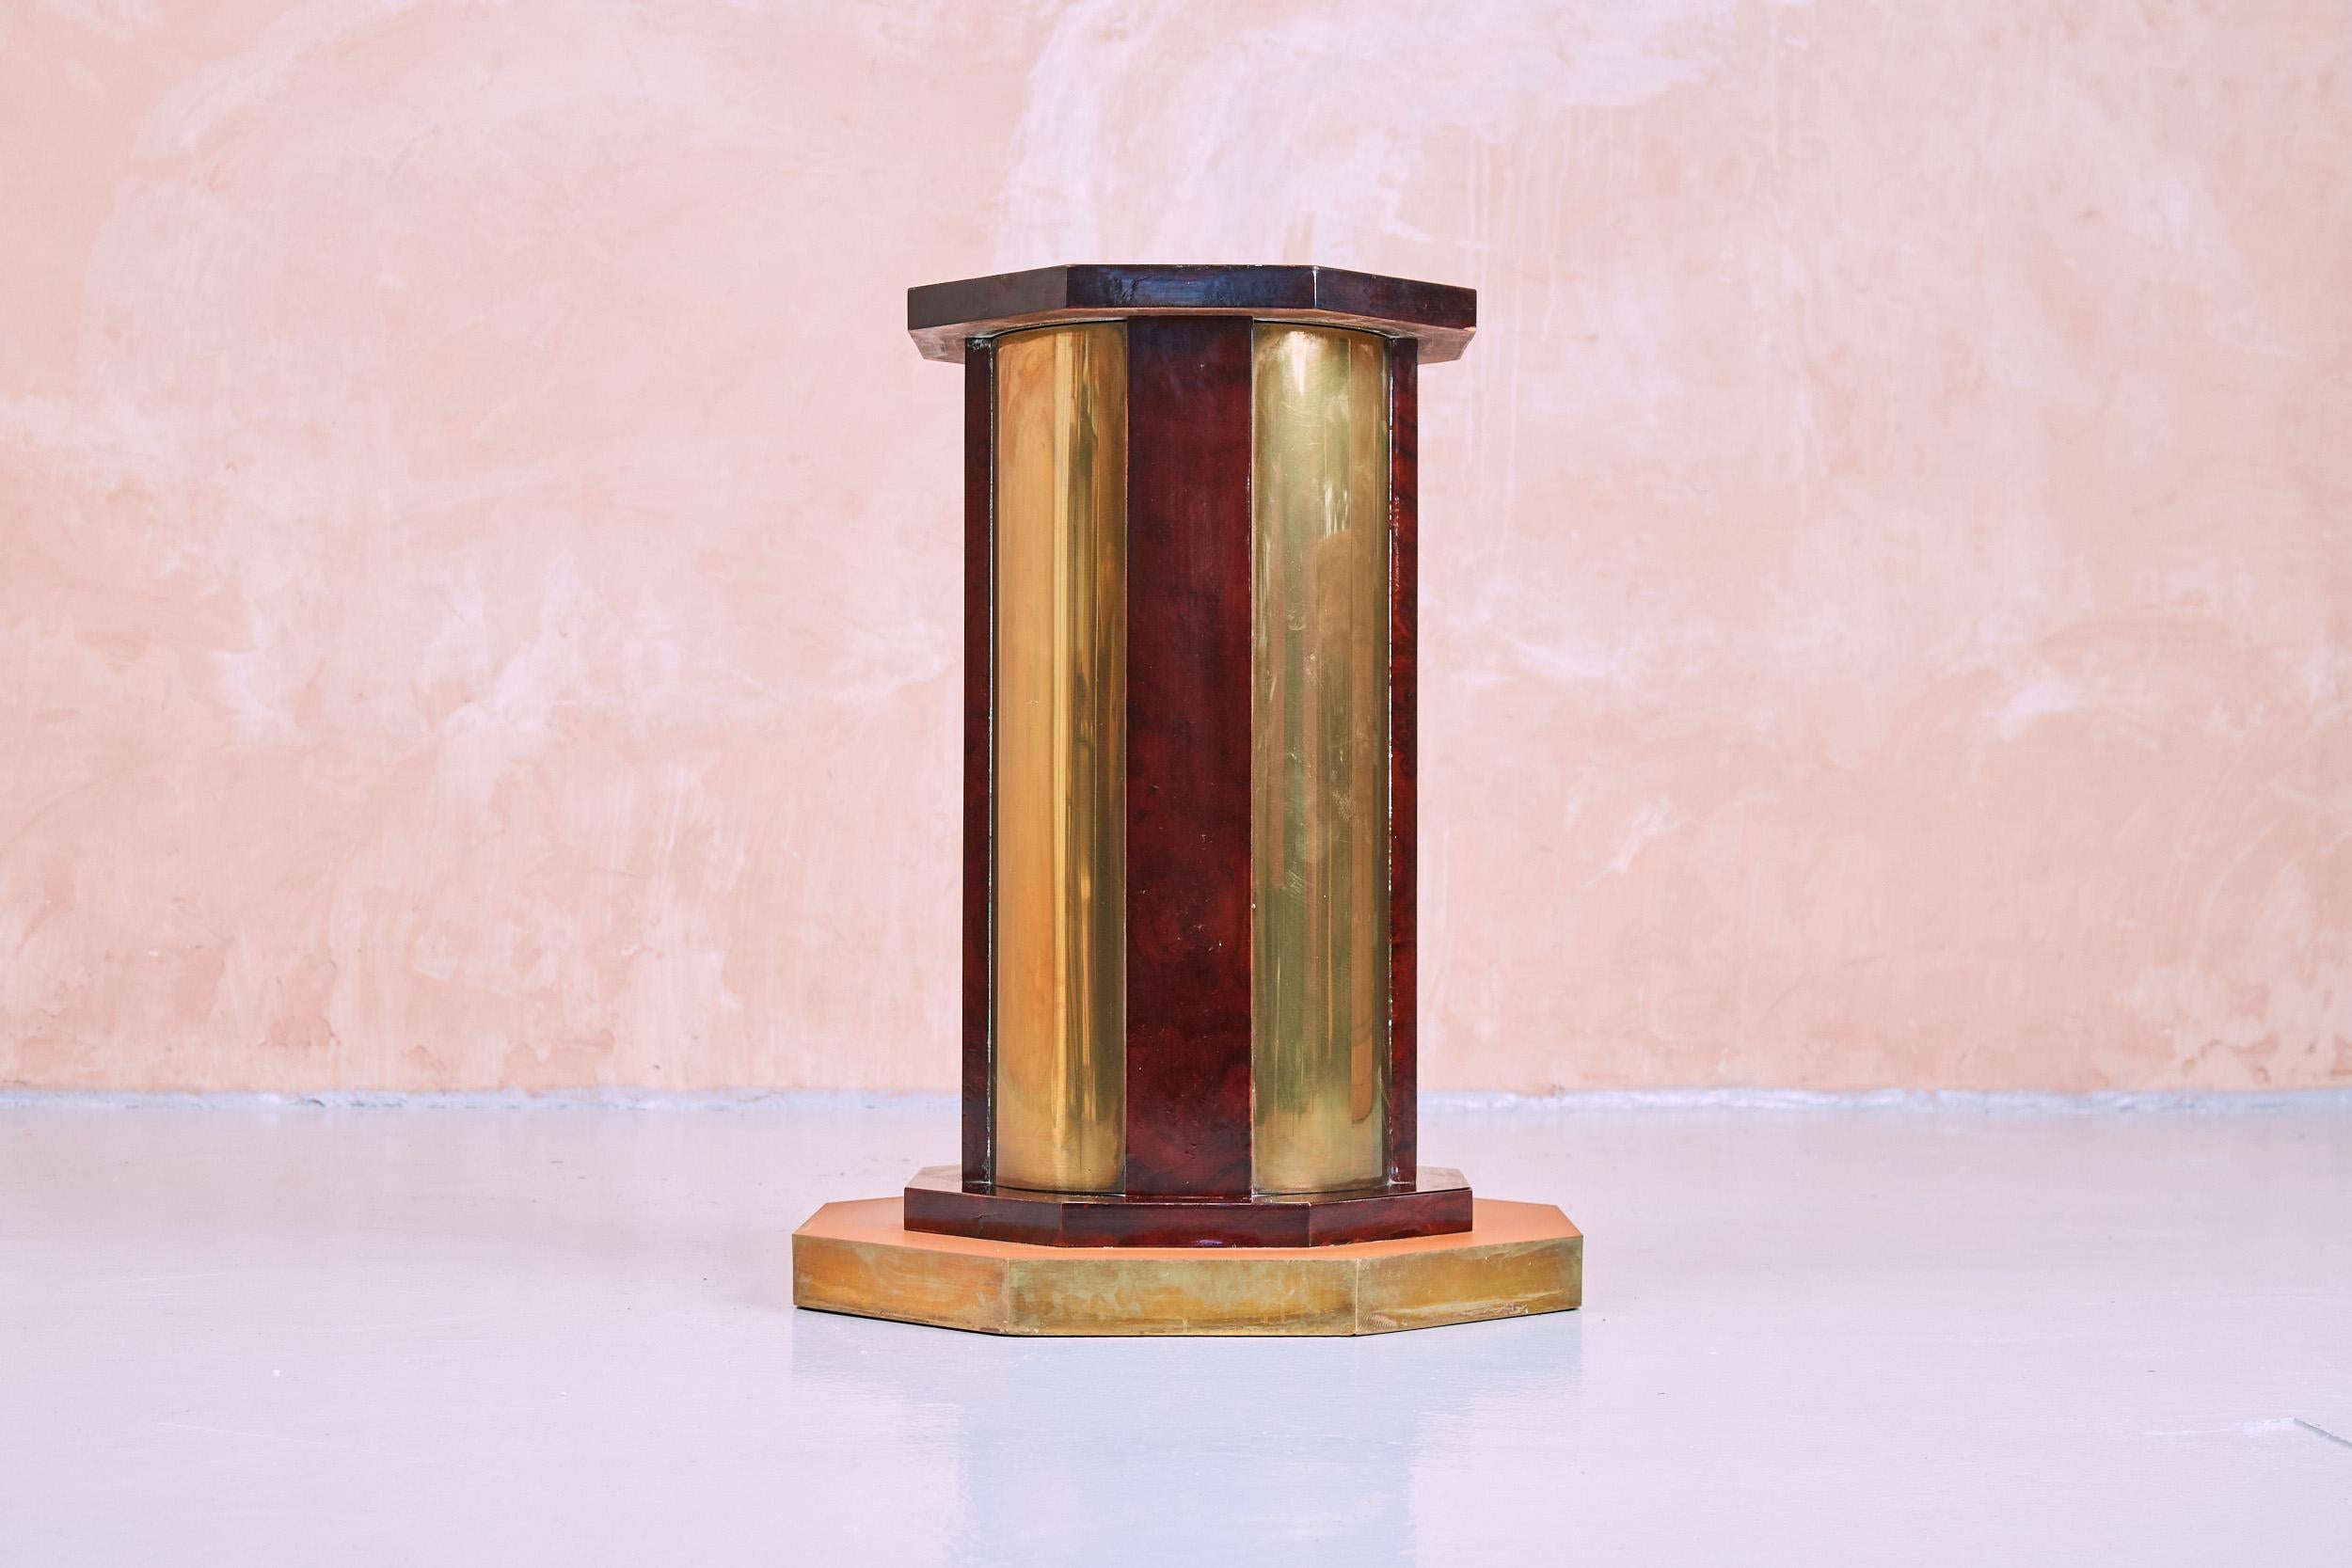 A burl wood and brass plinth,  made in Italy with exceptional craftsmanship.  Perfect as a Plinth, lamp table, or side table, and a spectacular addition to any interior whether modern or traditional.

Tommaso Barbi was a prominent Italian artist and